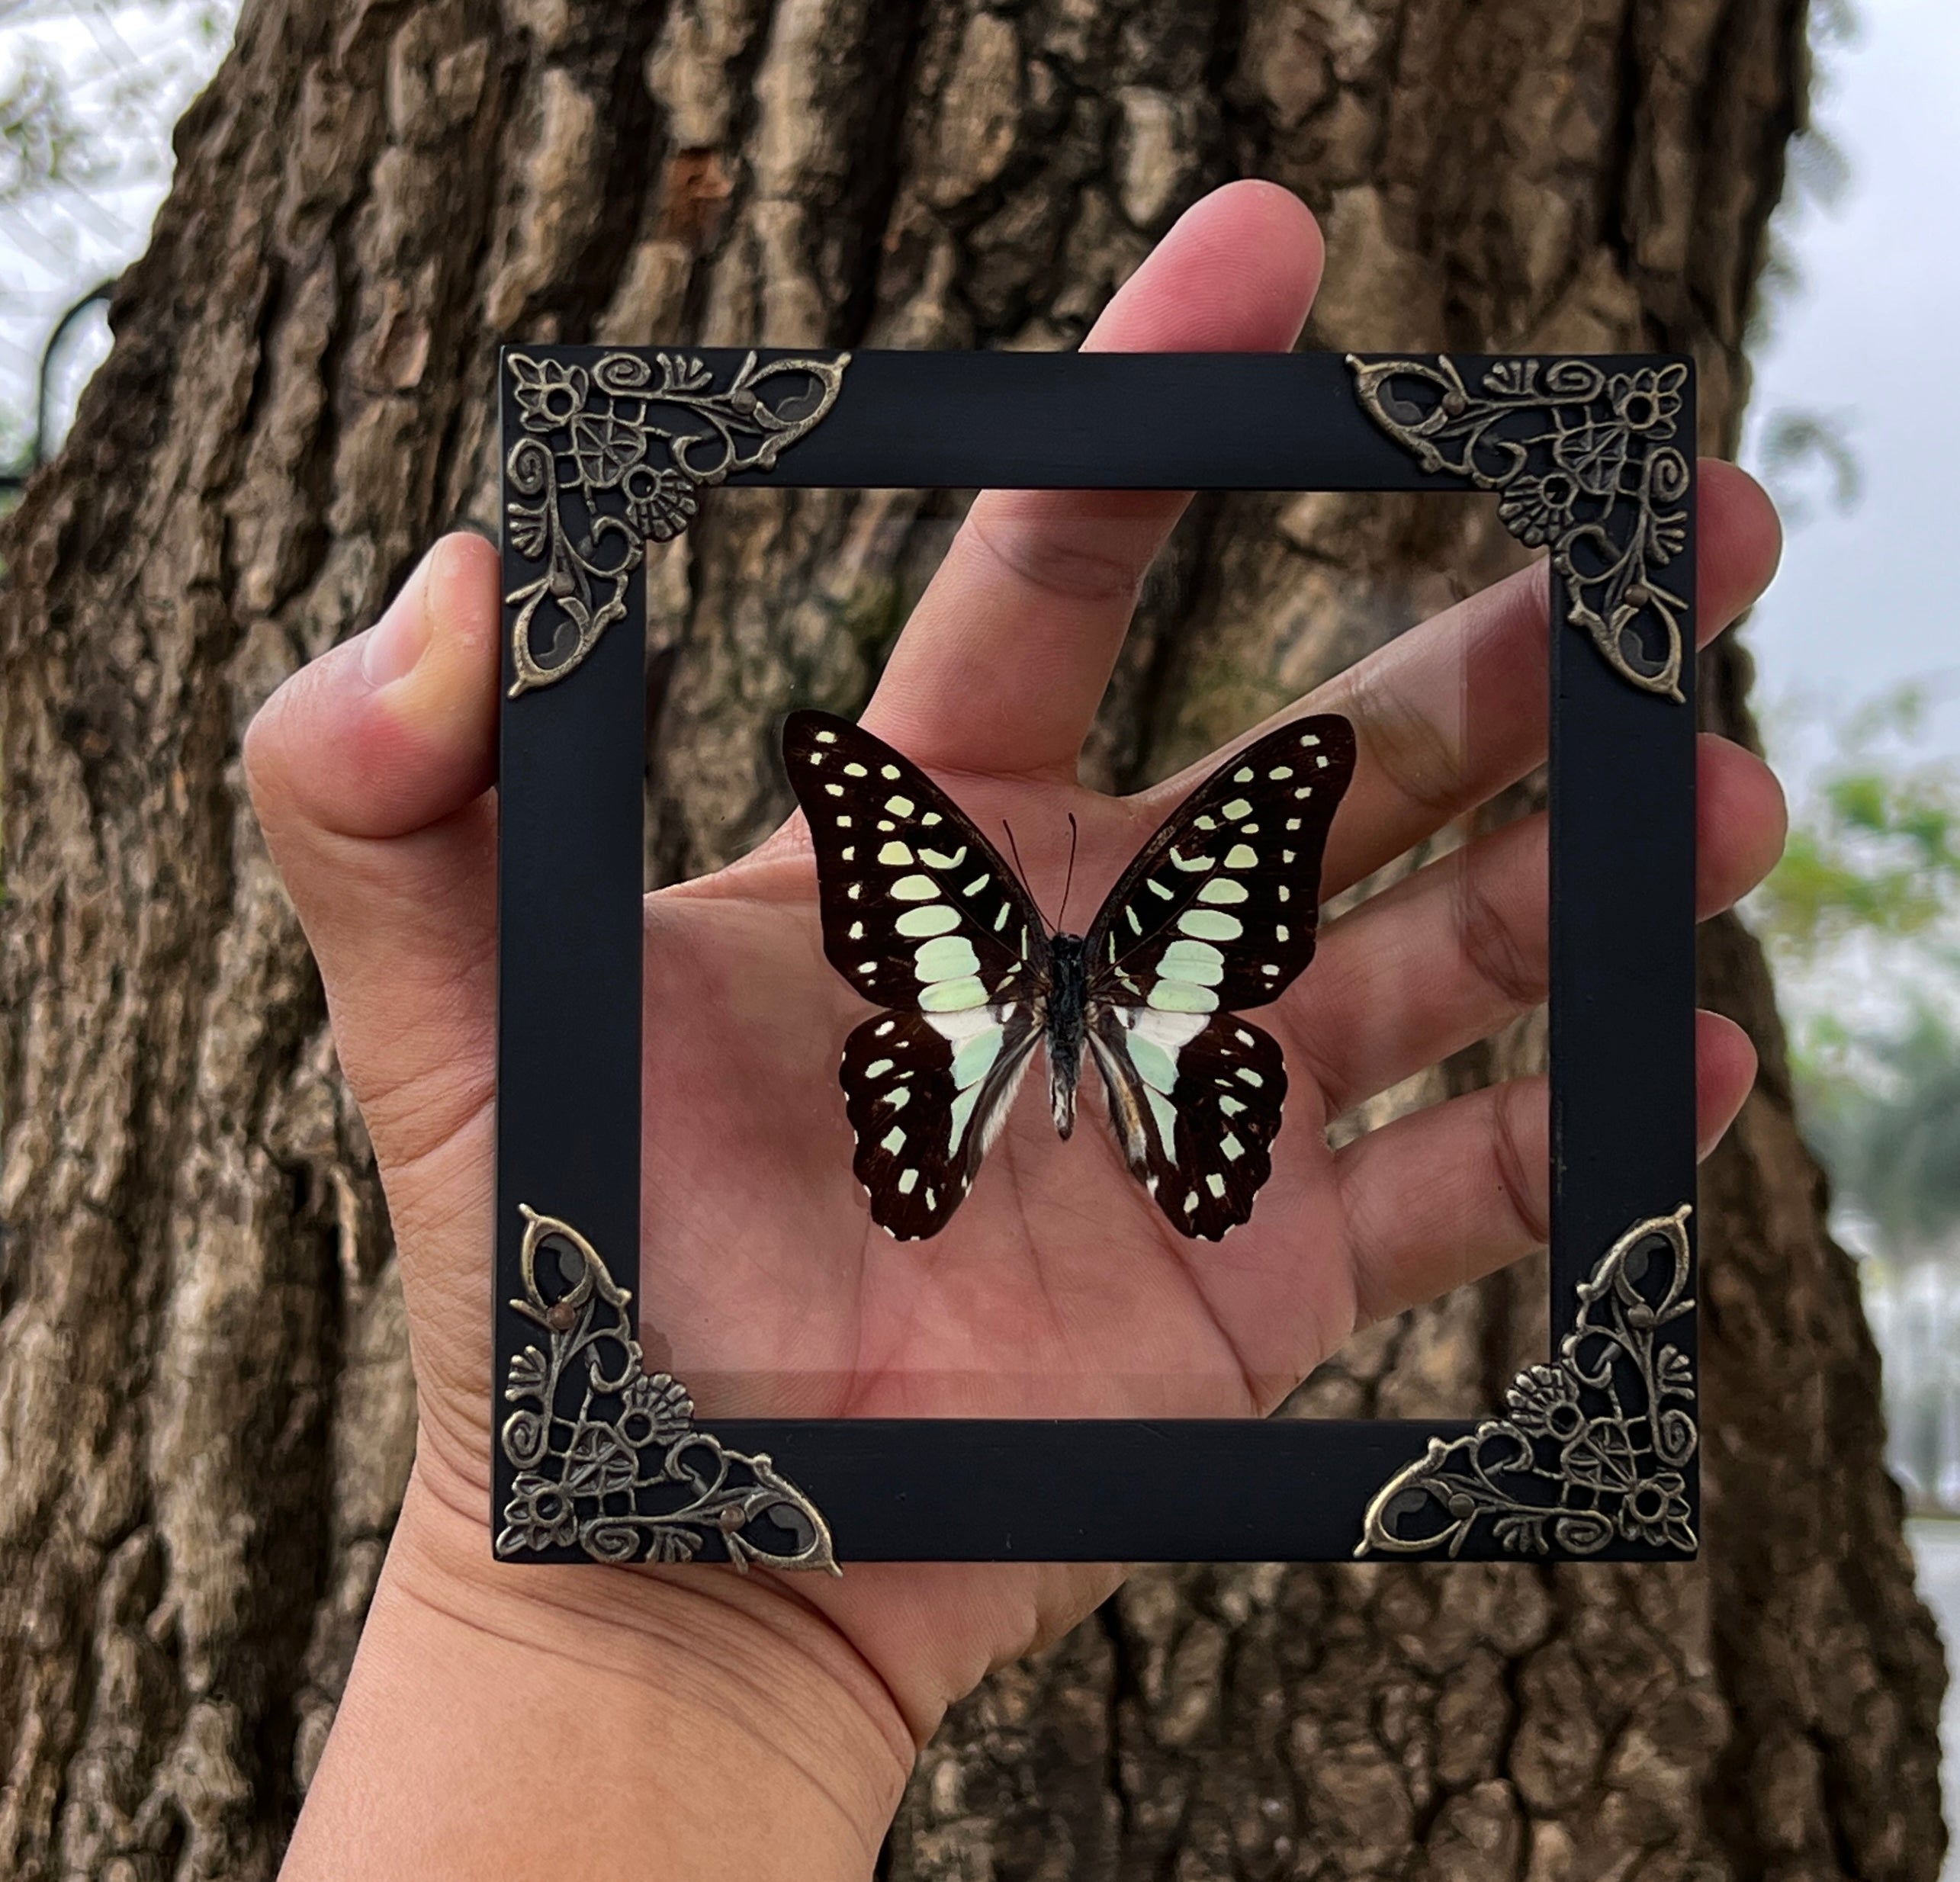 Real Framed Butterfly Glass Shadow Box Dead Dried Insect Specimens Taxidermy K12-11-KINH